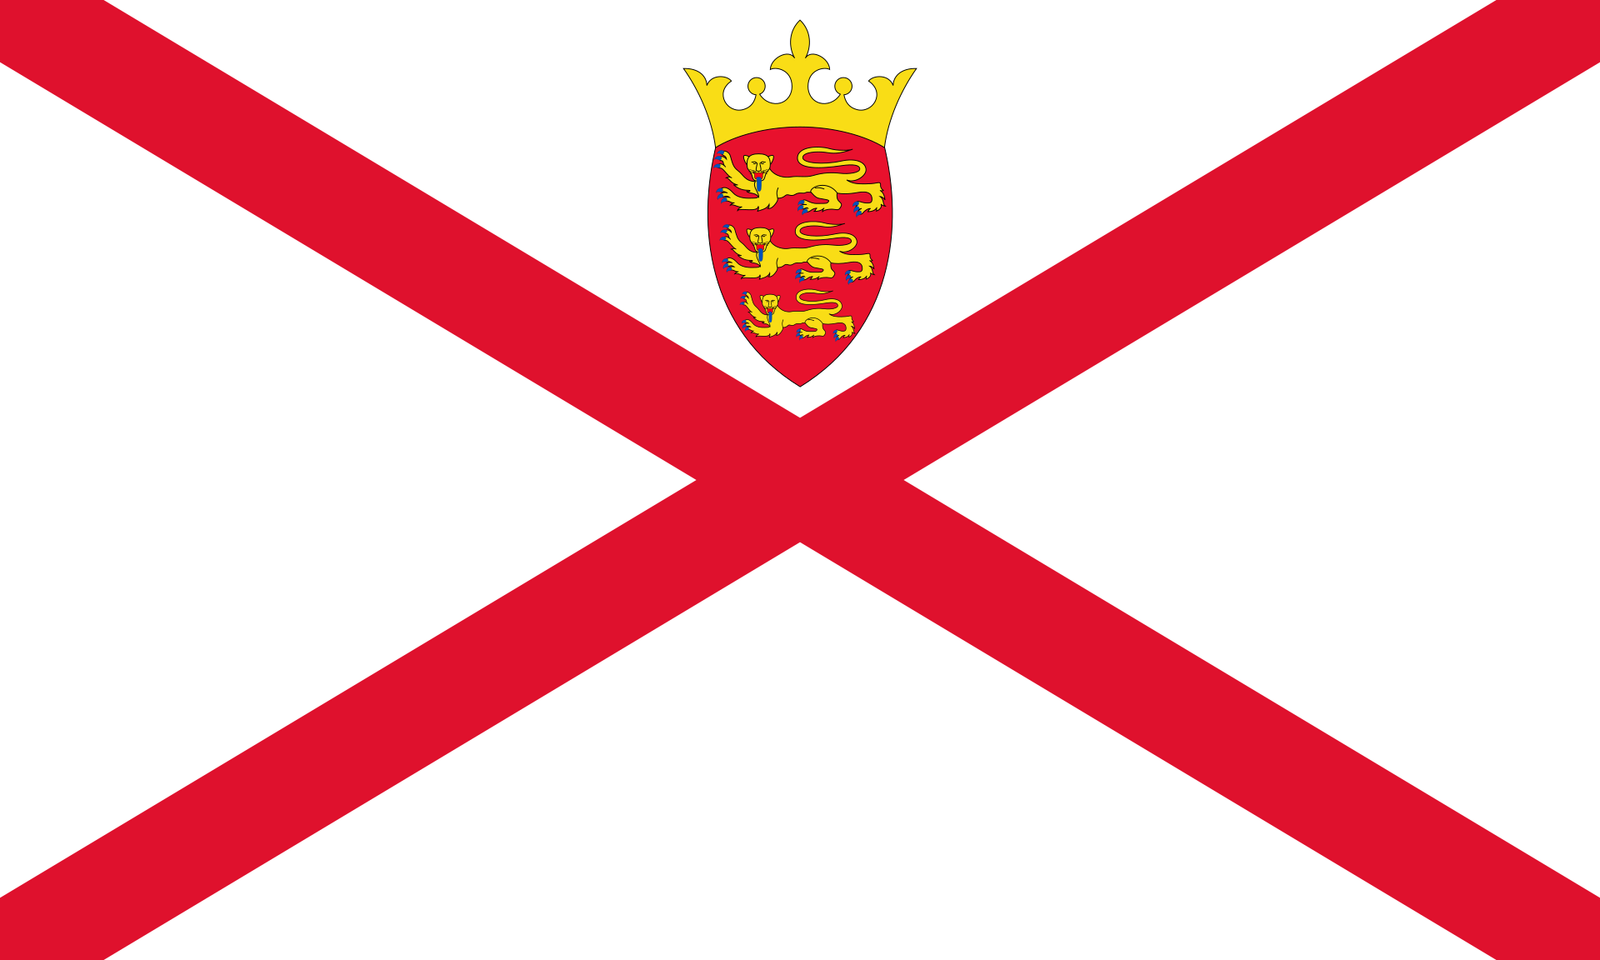 Flag of Jersey looks like this